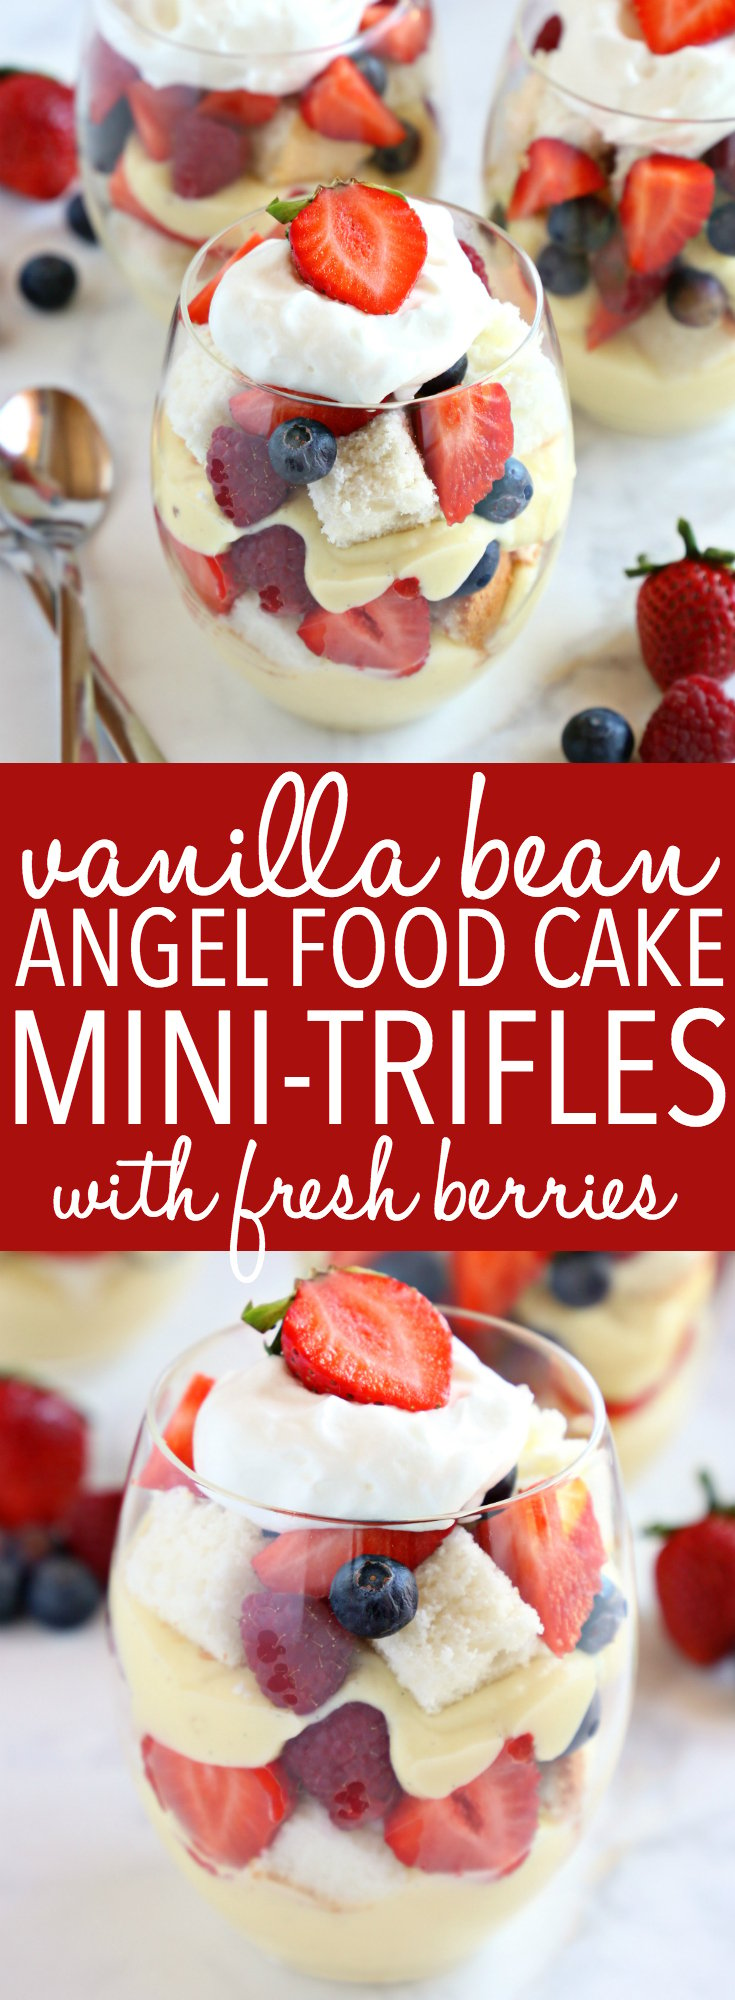 These Vanilla Bean Angel Food Cake Trifles with Fresh Berries are the perfect easy dessert for summer! Perfect for entertaining! Recipe from thebusybaker.ca! #angelfoodcake #cakerecipe #recipe #easy #summer #summerdessert #berries #fresh #homemade #fromscratch #trifle #minidessert #portioncontrol #light via @busybakerblog